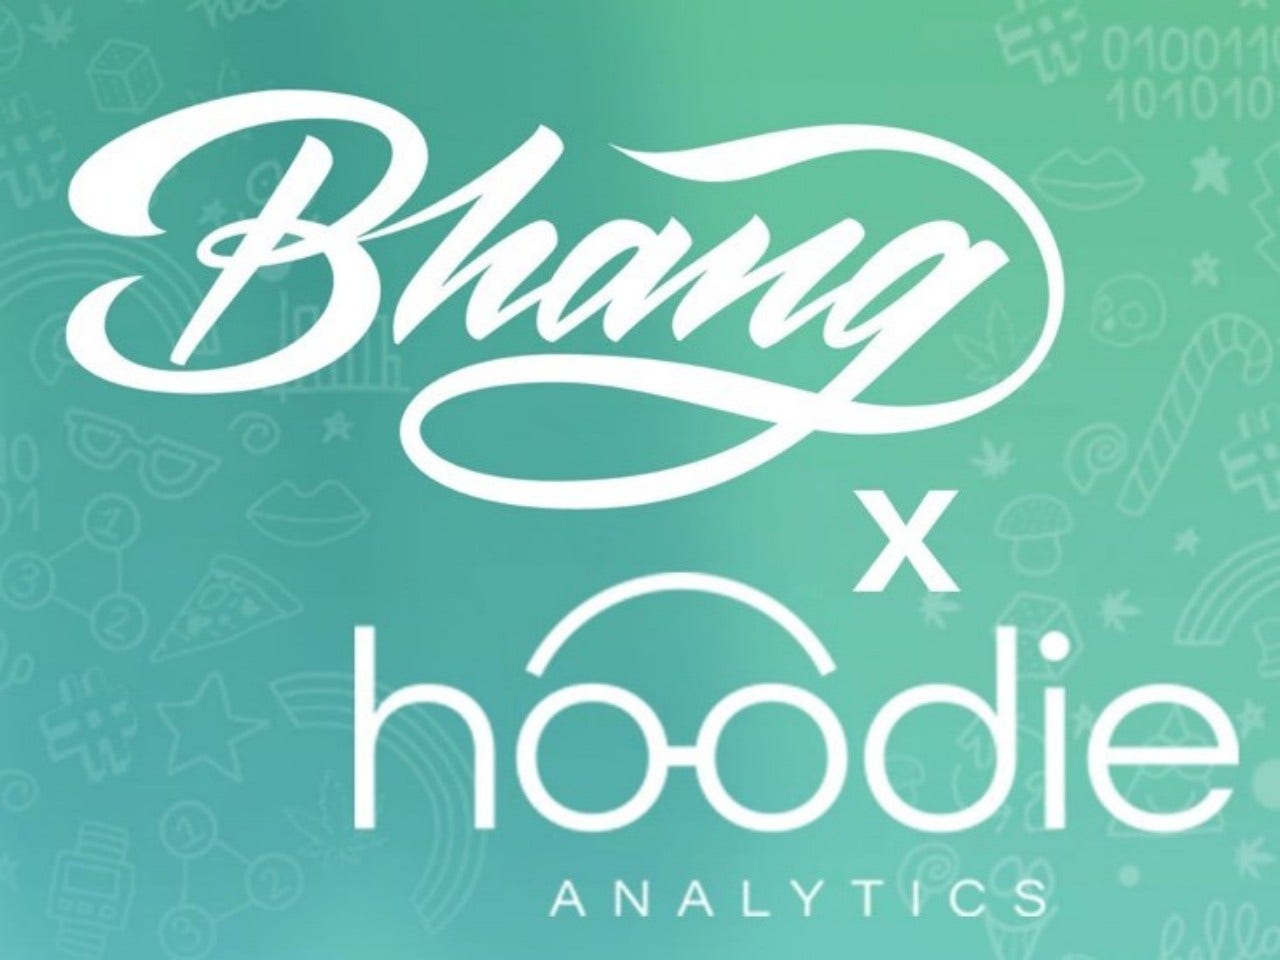 Cannabis Company Bhang Partners With Hoodie Analytics In A 'Shift To Data-Driven Decisions'